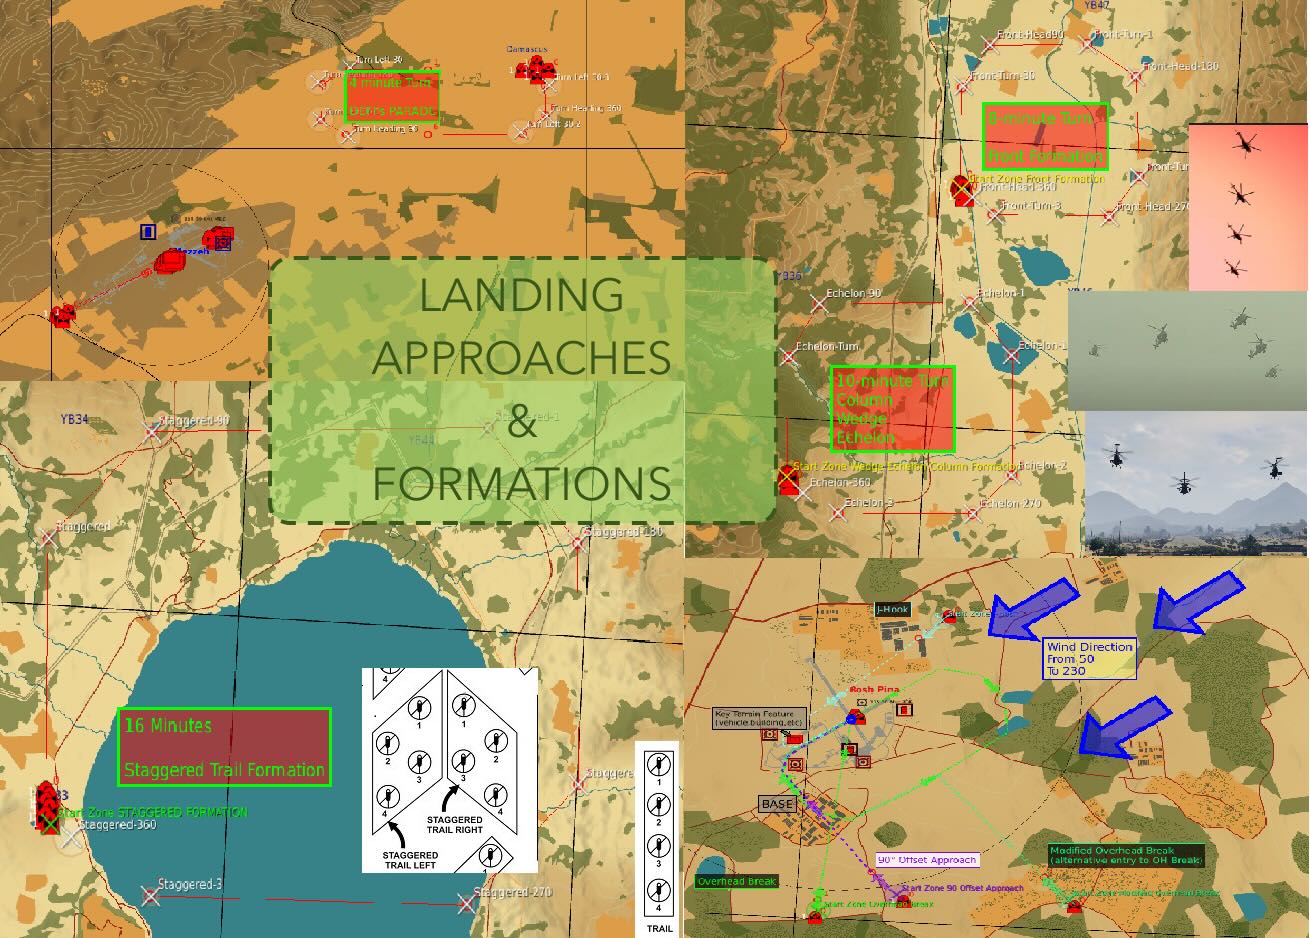 DEFIs TRAINING MISSION [10] - LANDING APPROACHES & FORMATION FLYING EXERCISES